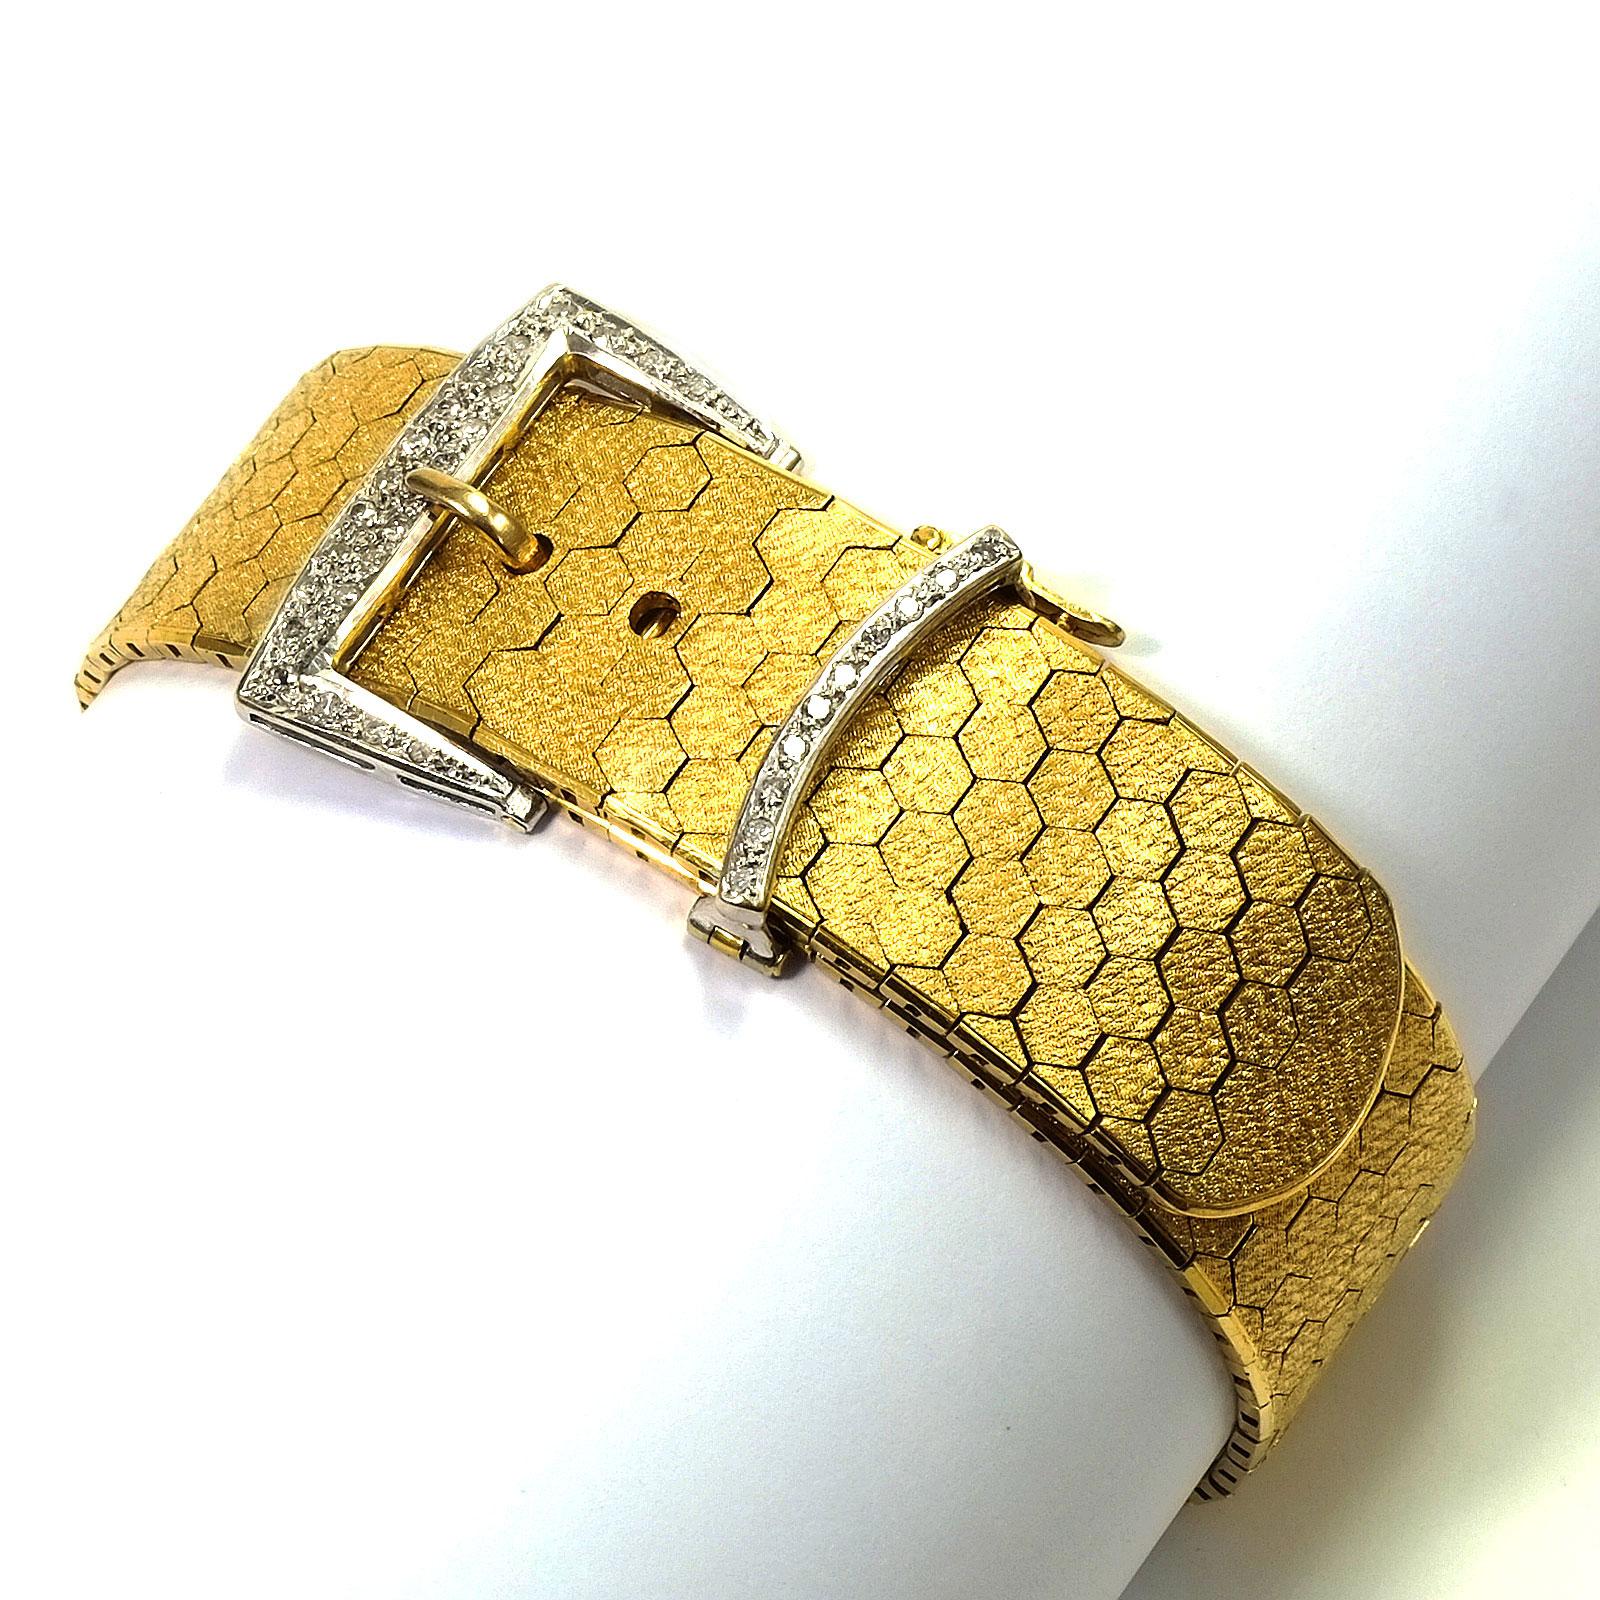 Retro 18 K yellow gold and 0.32 carat diamond buckle Bracelet circa 1940

Inspired by the world of couture, this elegant Retro buckle bracelet is designed as an adjustable belt. The supple gold band with a satin honeycomb pattern is made of solid